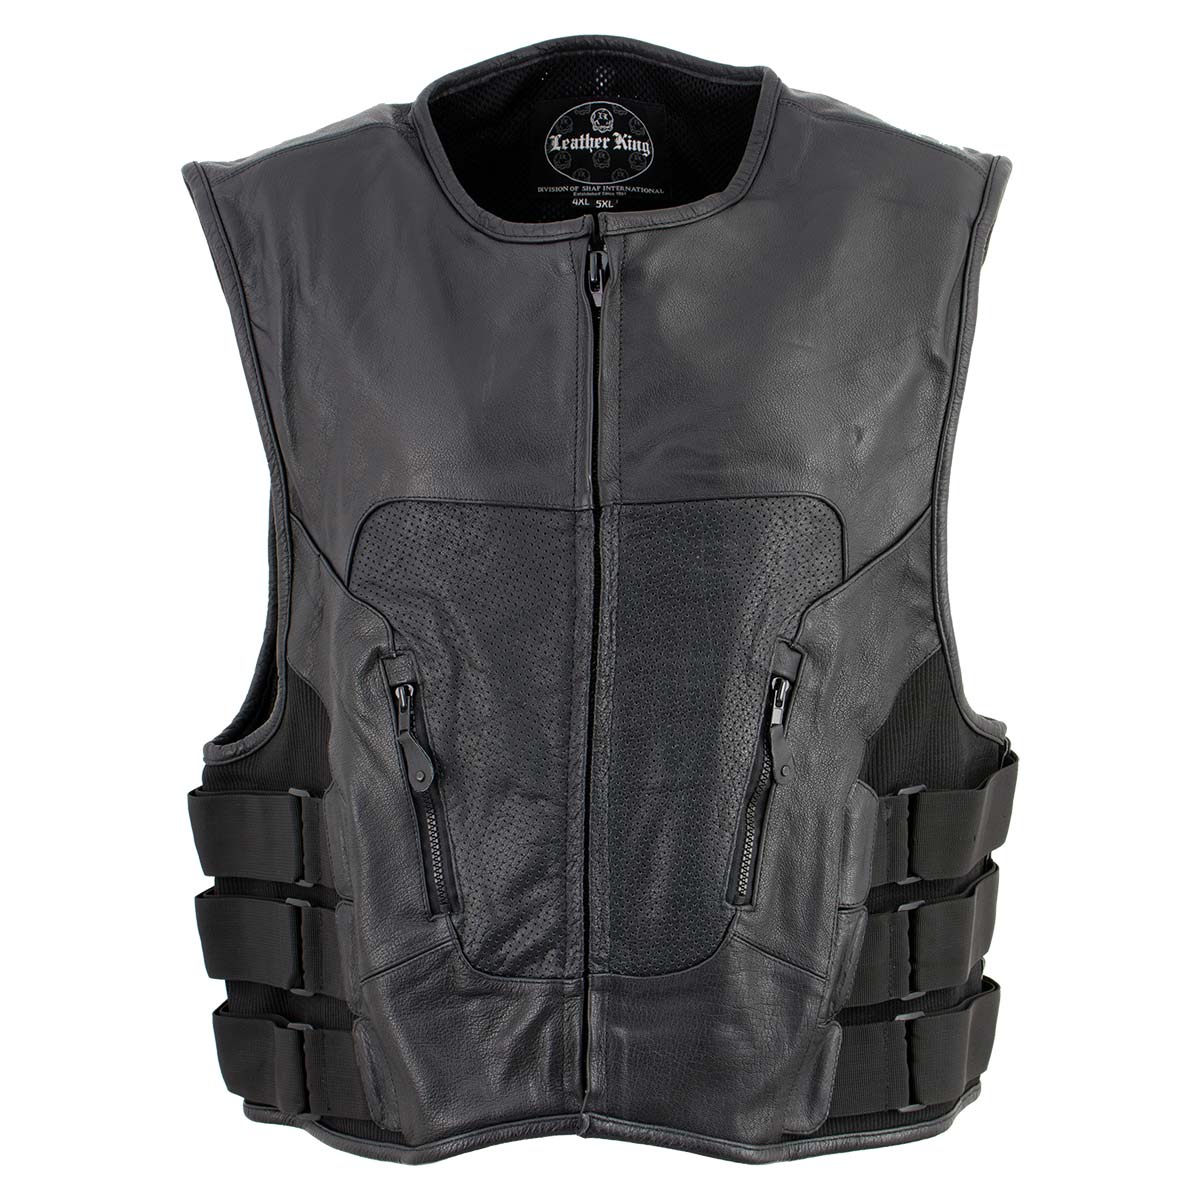 Leather King XSM1467 Men's Classic Black Leather Vest with Back Armor